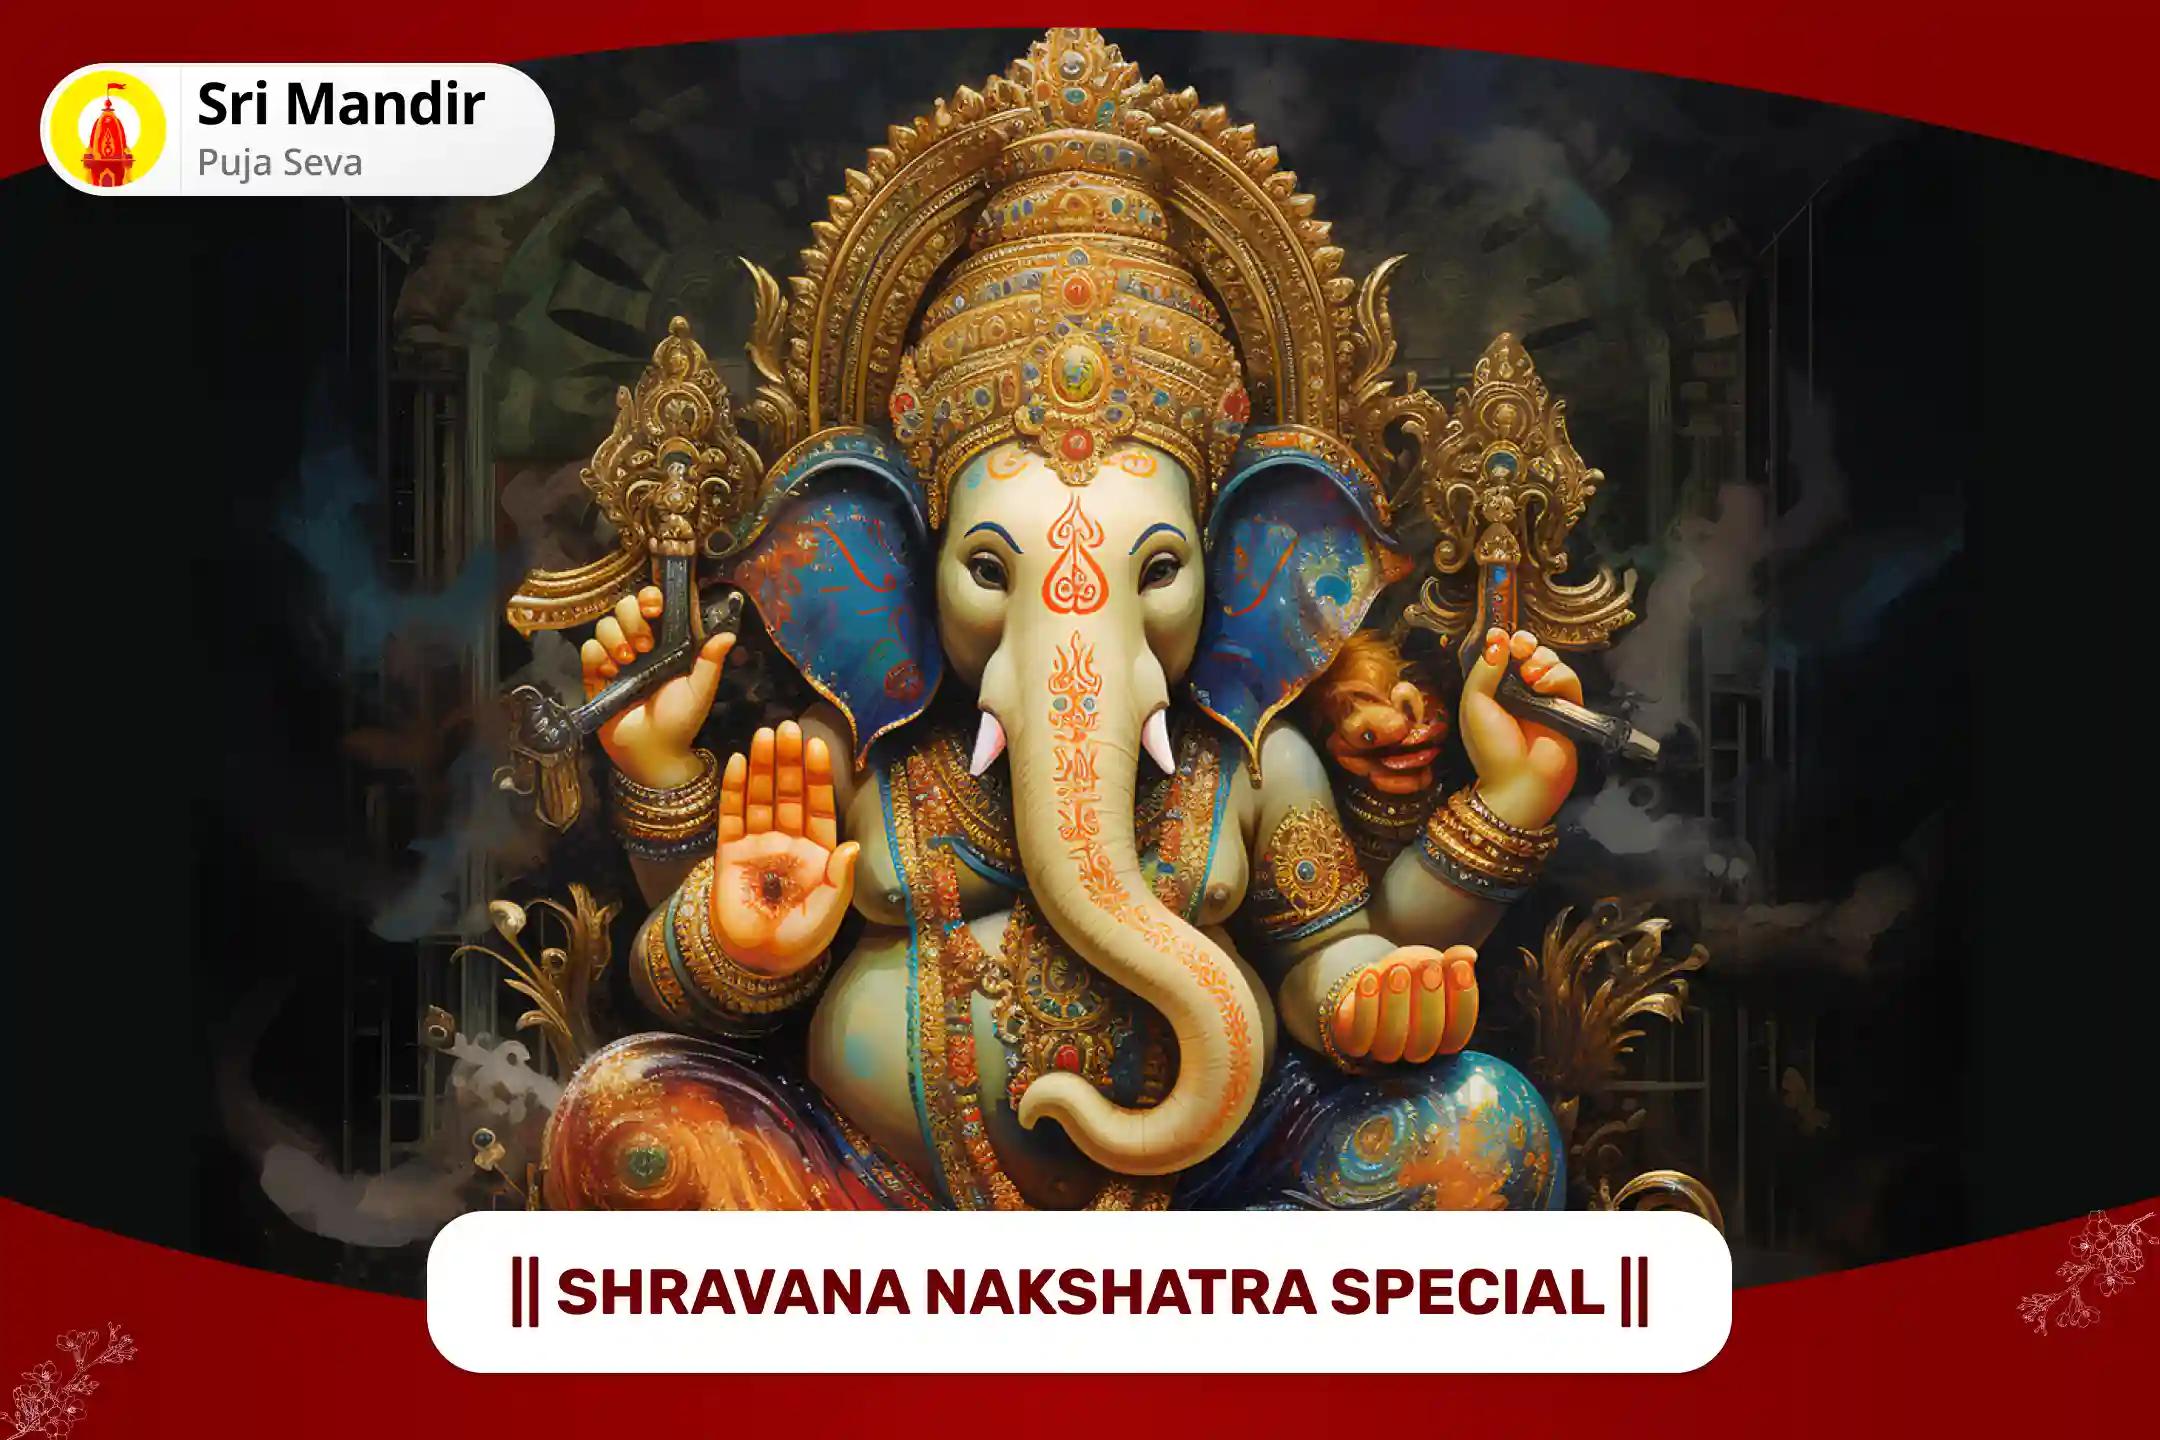 Shravana Nakshatra Special Ganesh Navagraha Havan and Atharvashirsha Path for Removal of Obstacles and Achieve Stability in Life